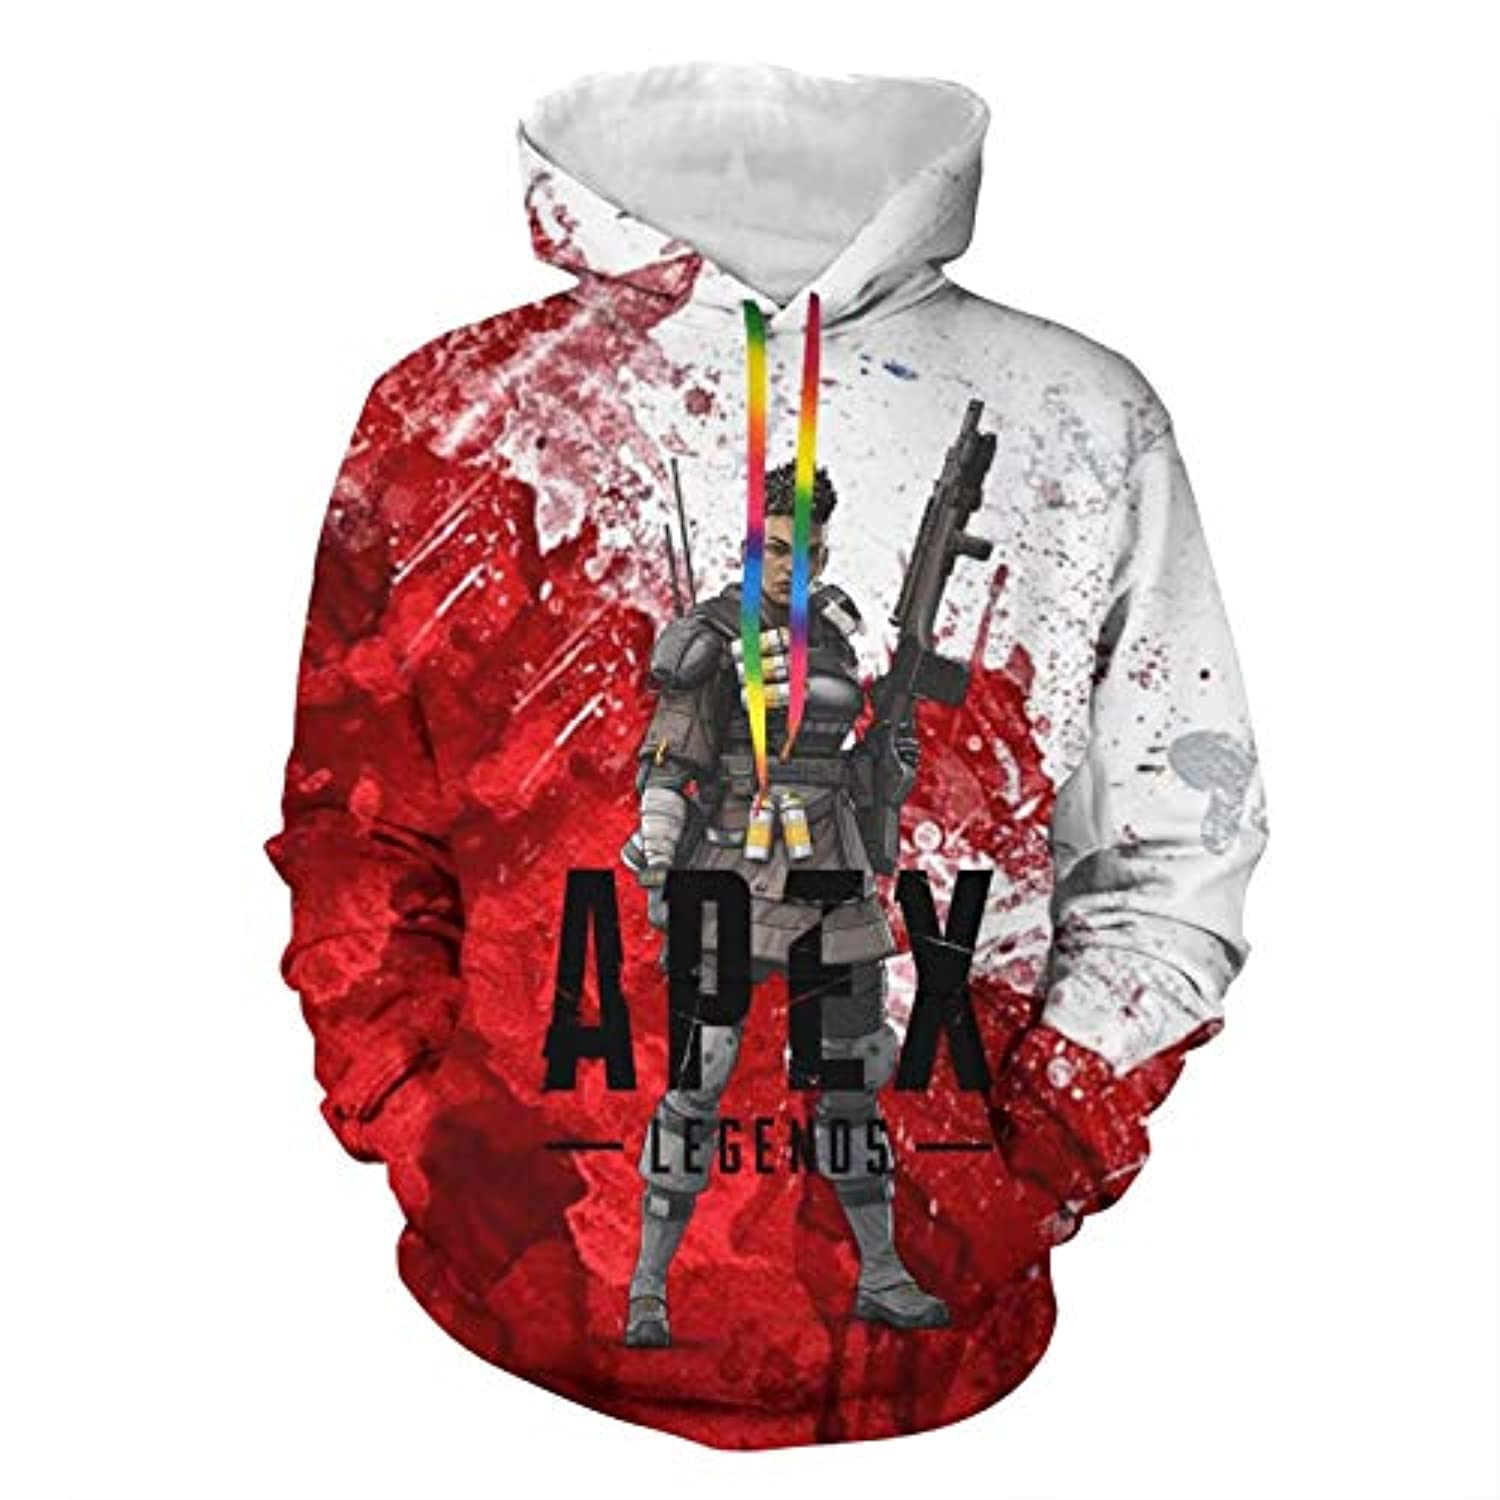 3D Printed Pirates of the Caribbean Hoodies - Movies Fashion Hoody Pullover  - Anime Hoodie Shop